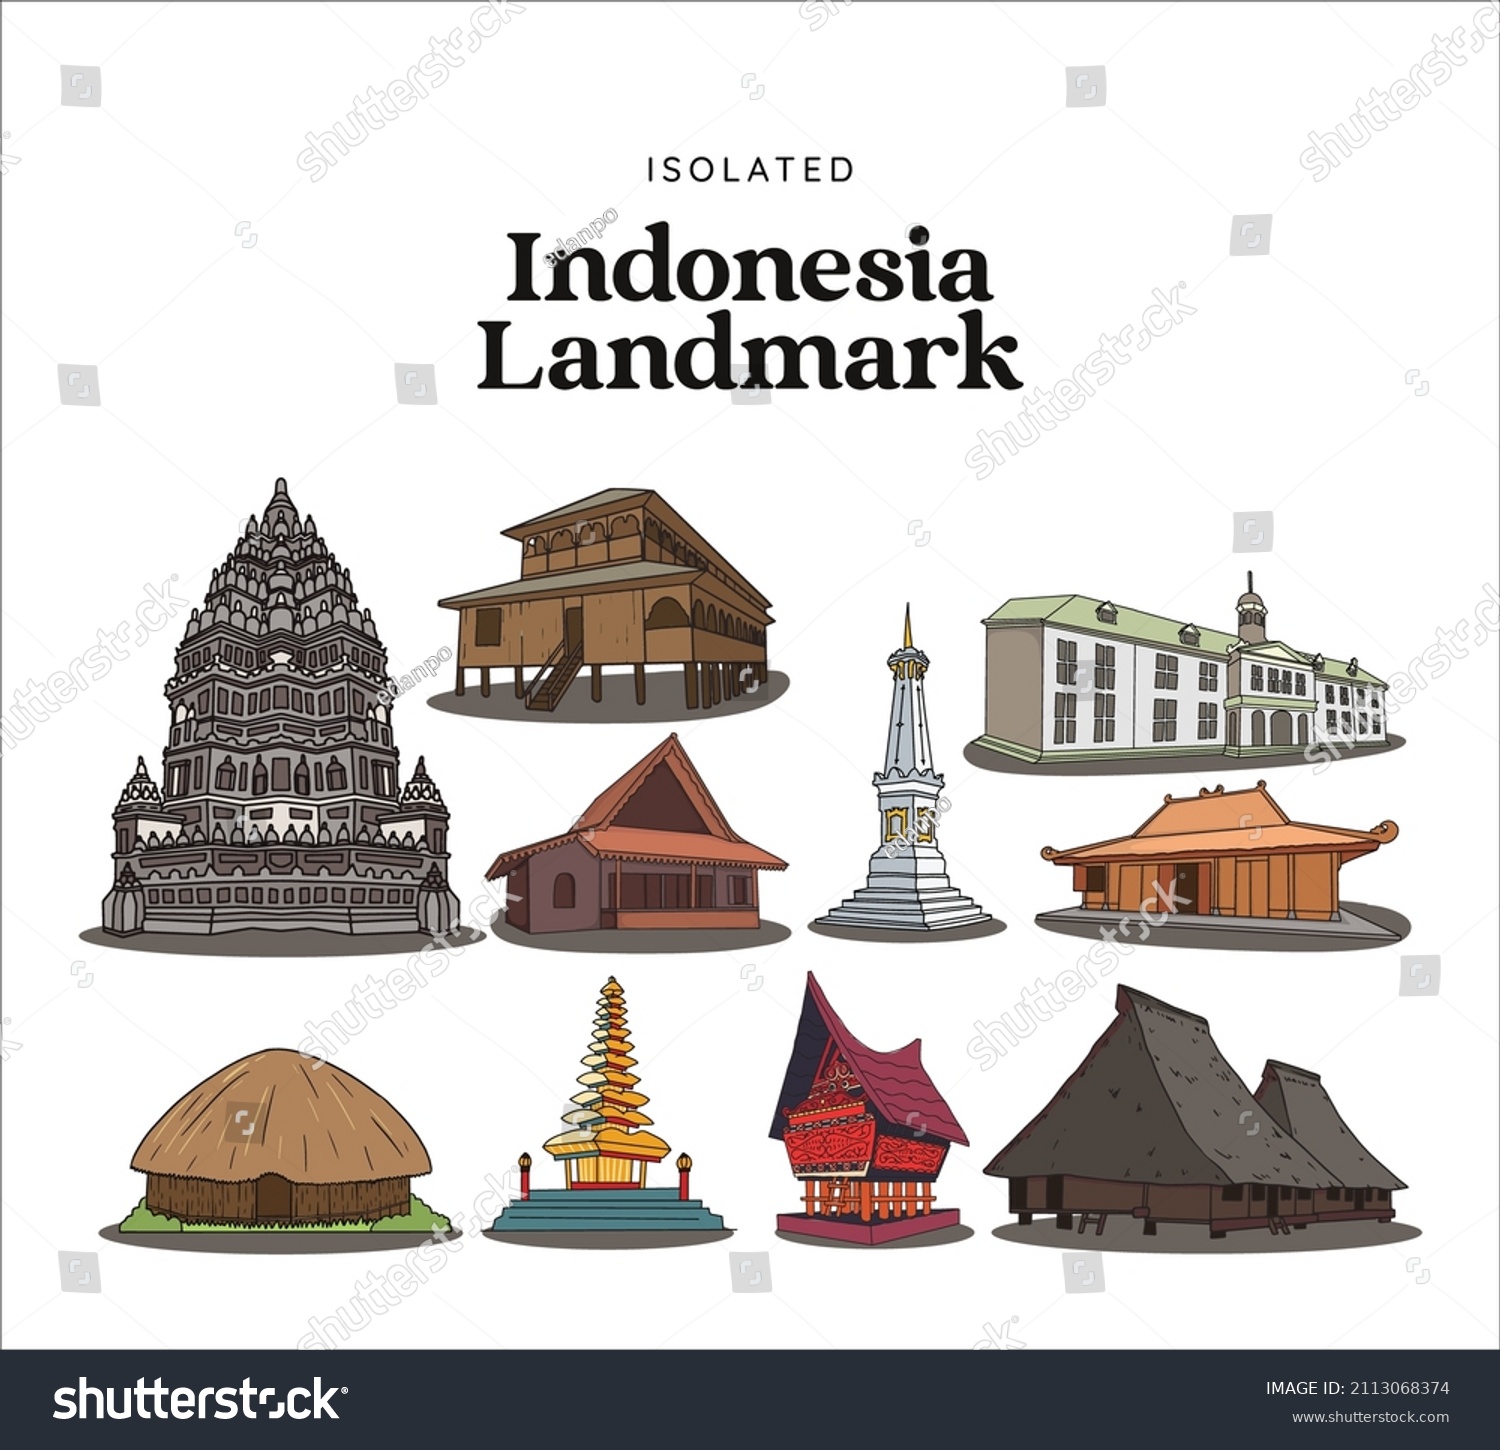 SVG of Isolated Indonesia Landmark. Hand drawn Indonesian cultures background svg